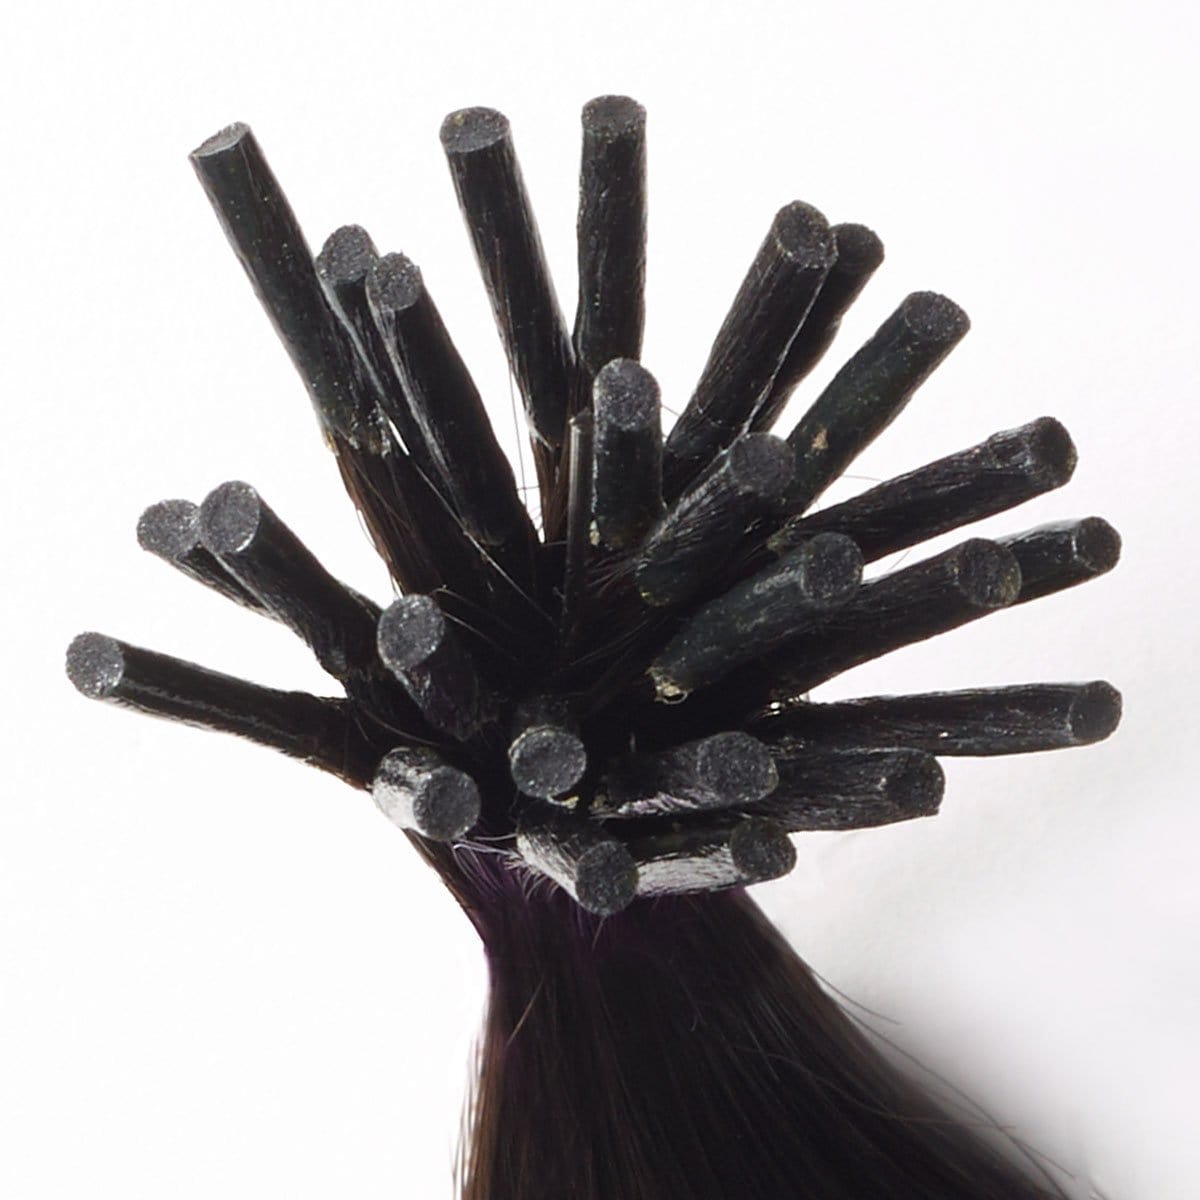 4 x Curly Fusion I-Tip Hair Extension Bundle Deal